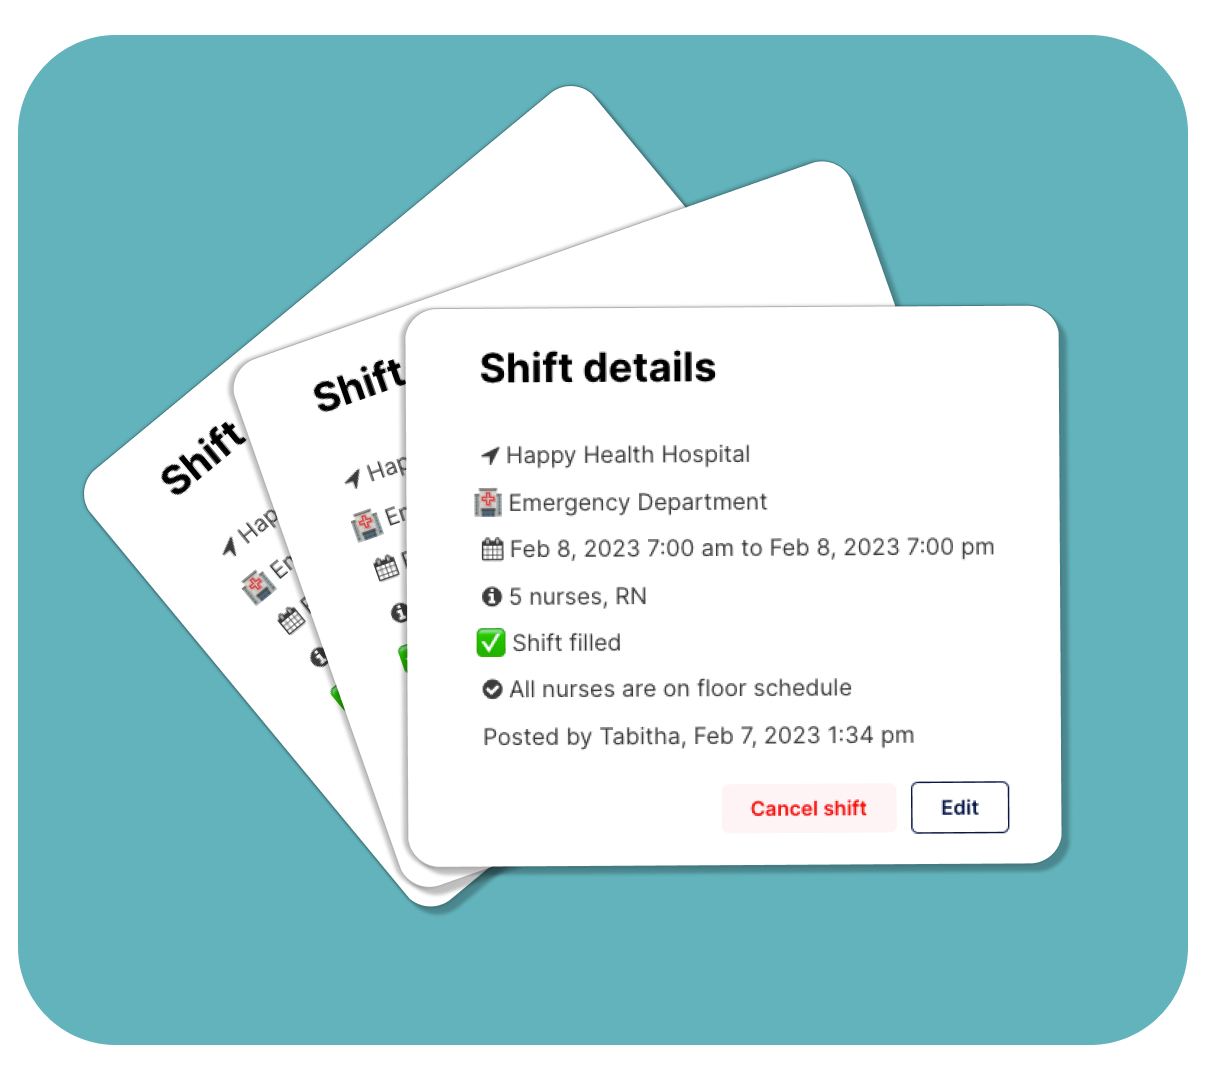 Shift detail cards